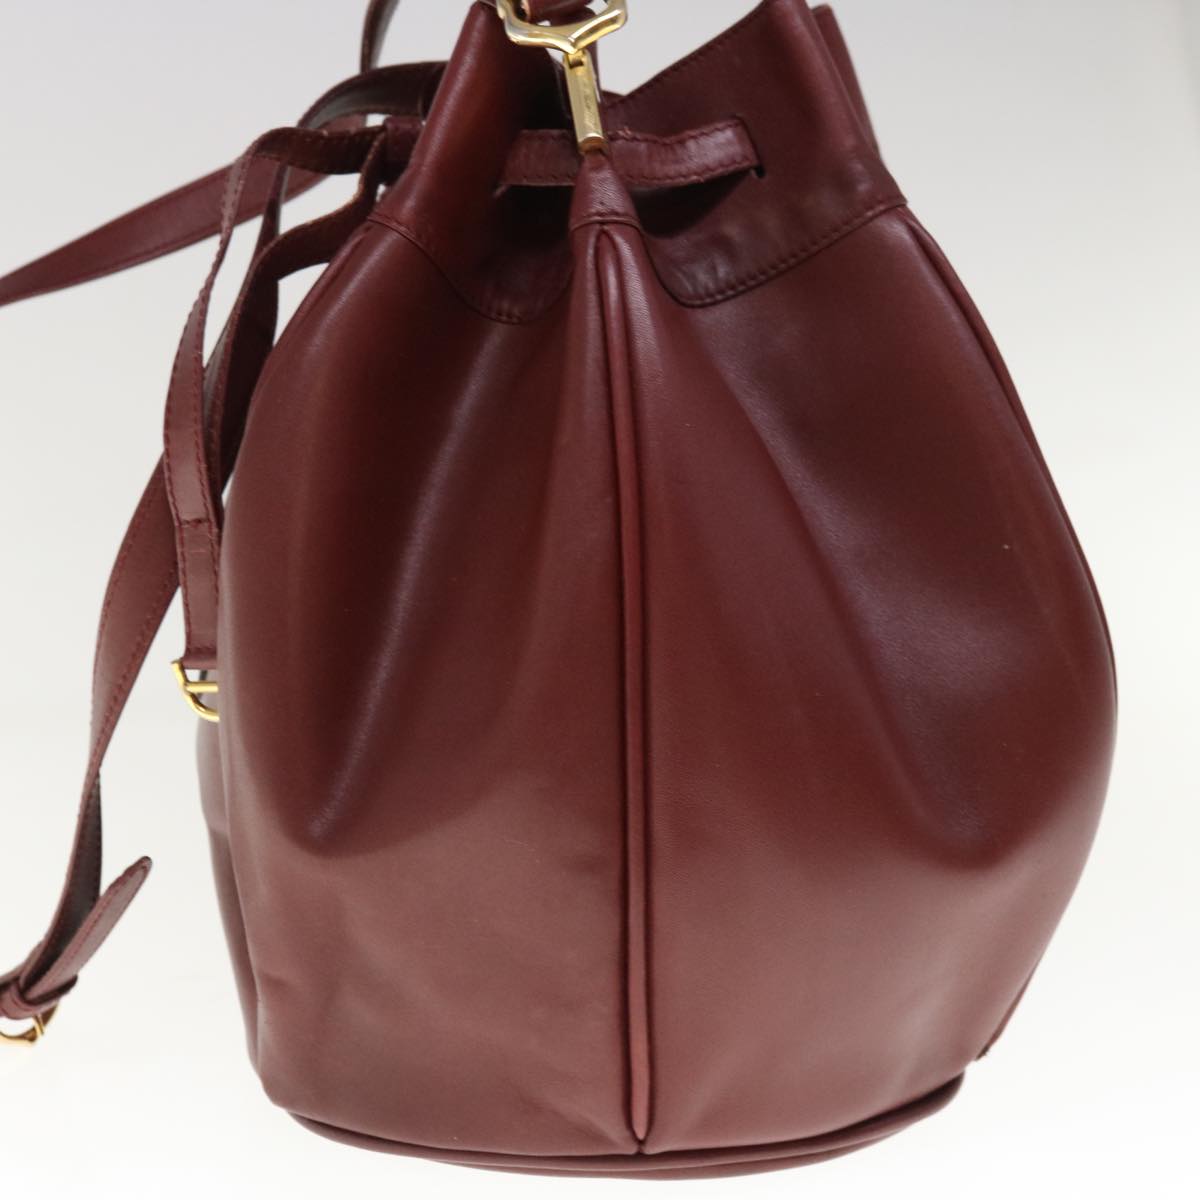 CARTIER Shoulder Bag Leather Wine Red Auth 65776